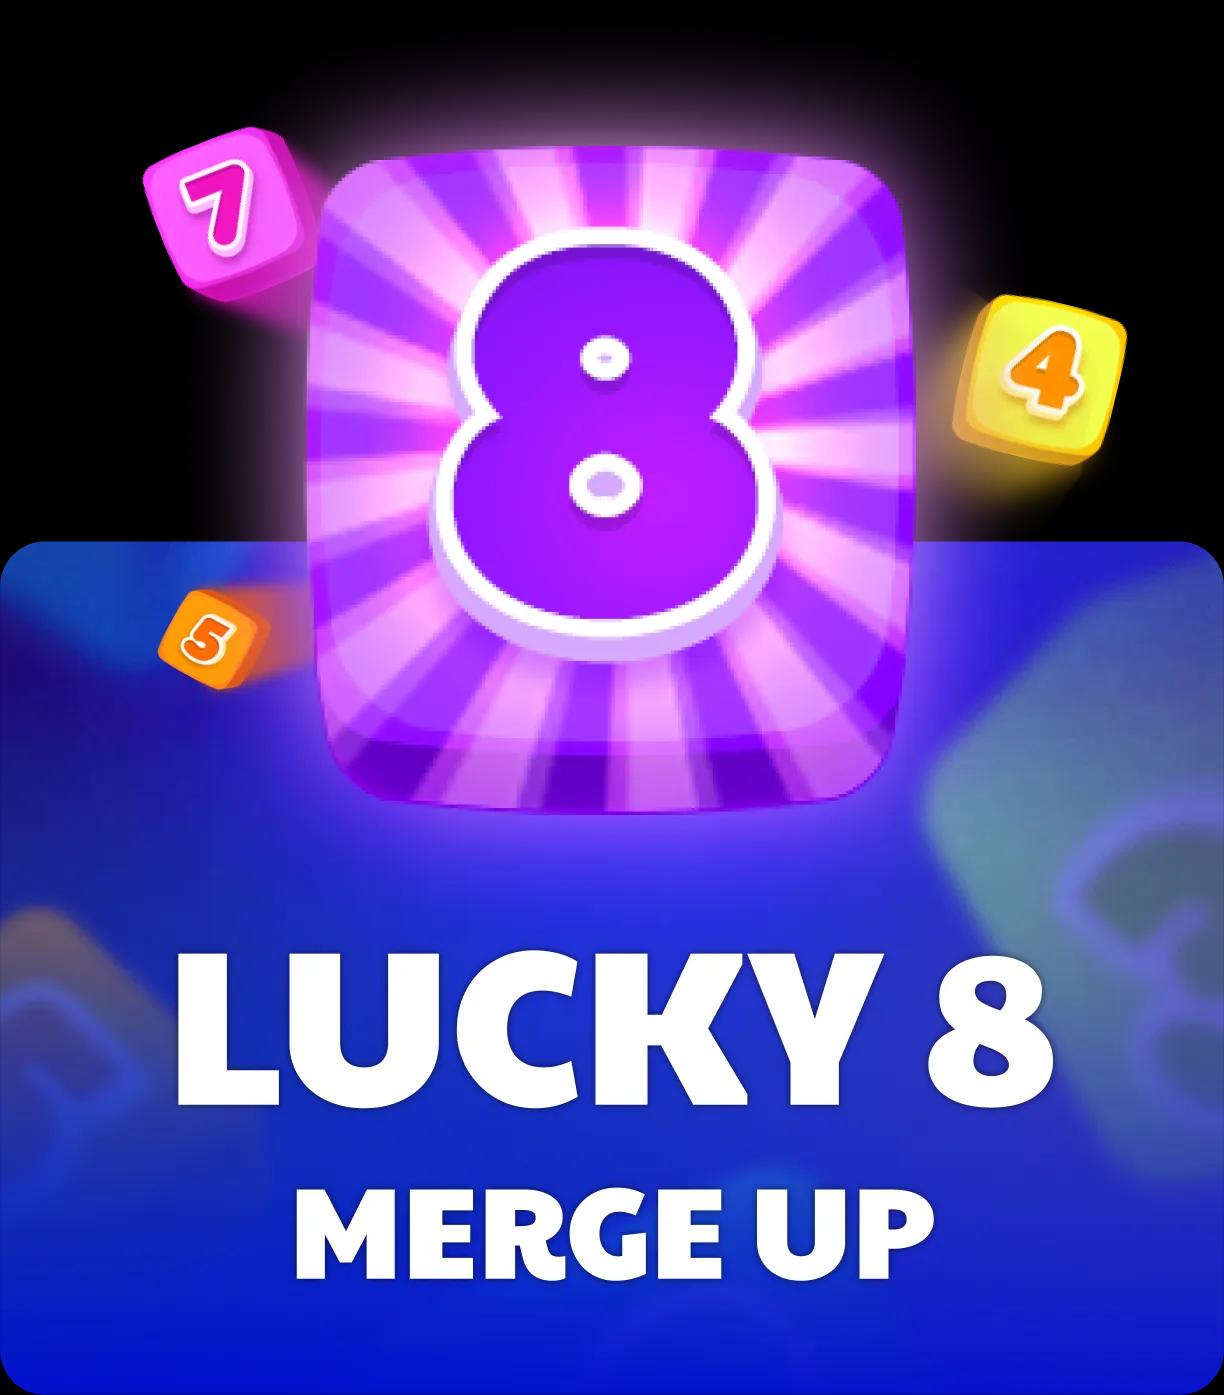 Lucky8MergeUp_square.webp